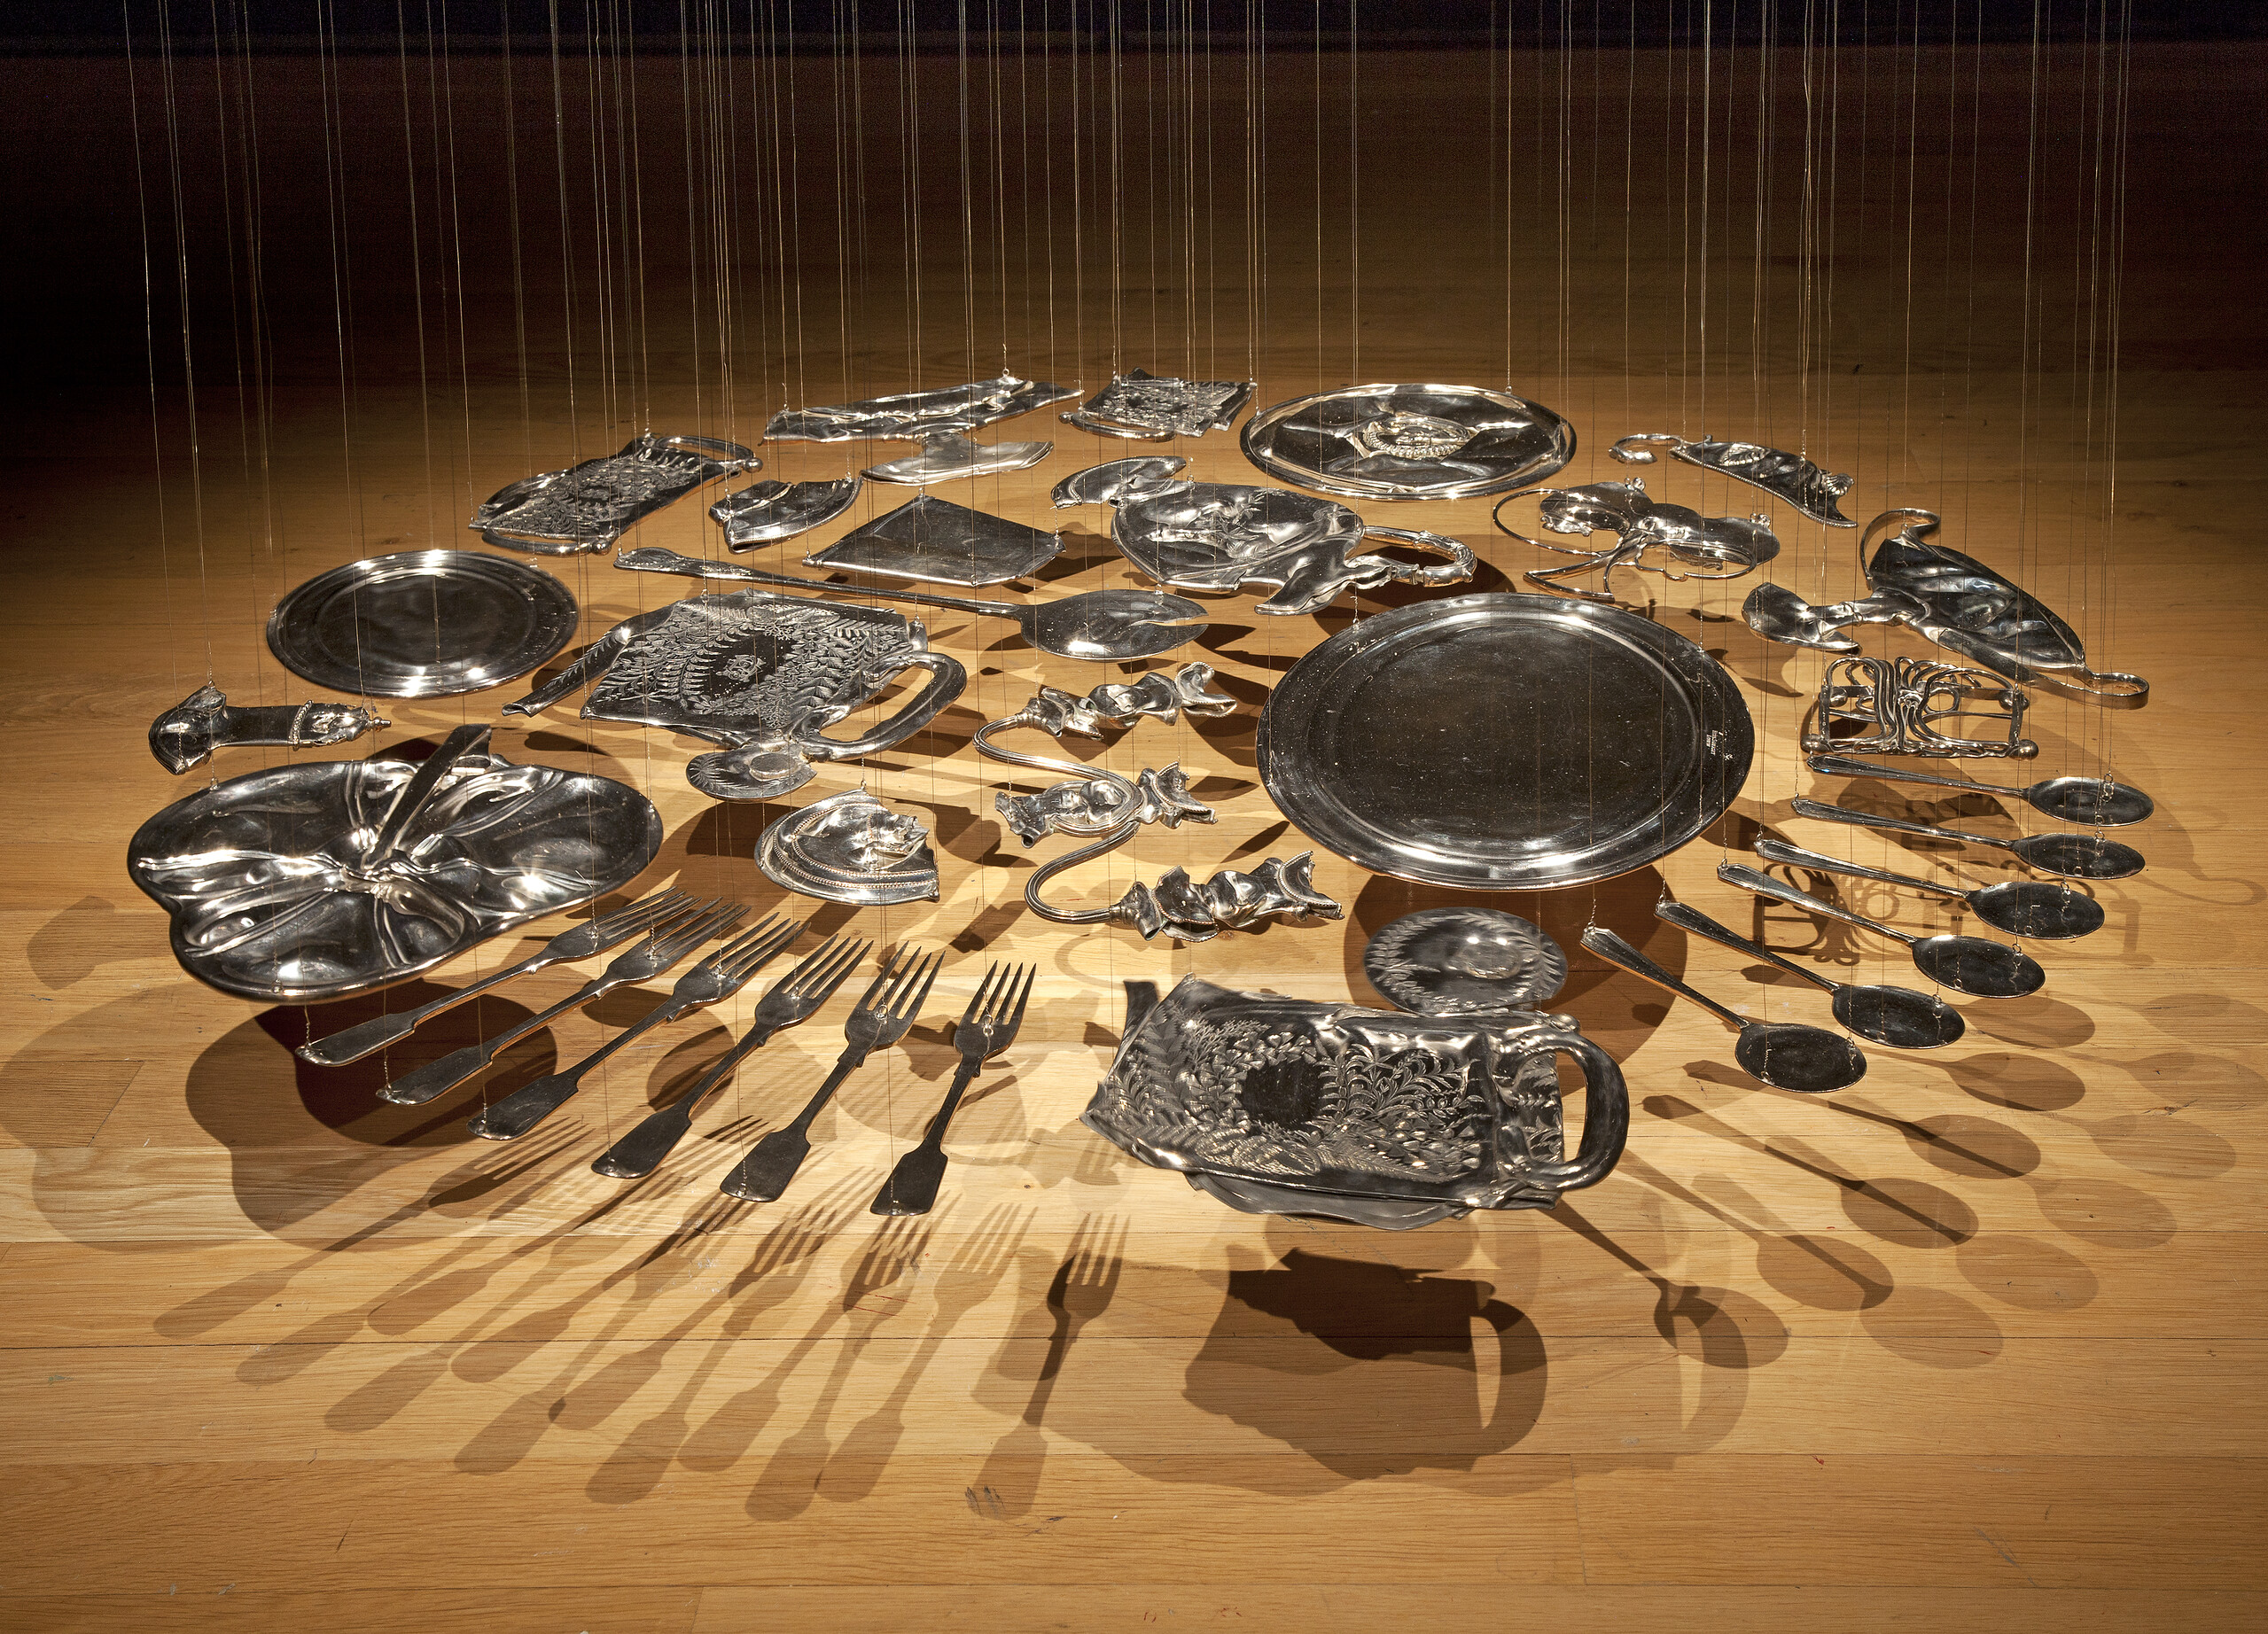 Thirty silver-plated items, including spoons, forks, trays, and various serving ware, are flattened and hang suspended from the ceiling with thin, nearly invisible wire. The pieces are arranged in a circle several inches above the floor.